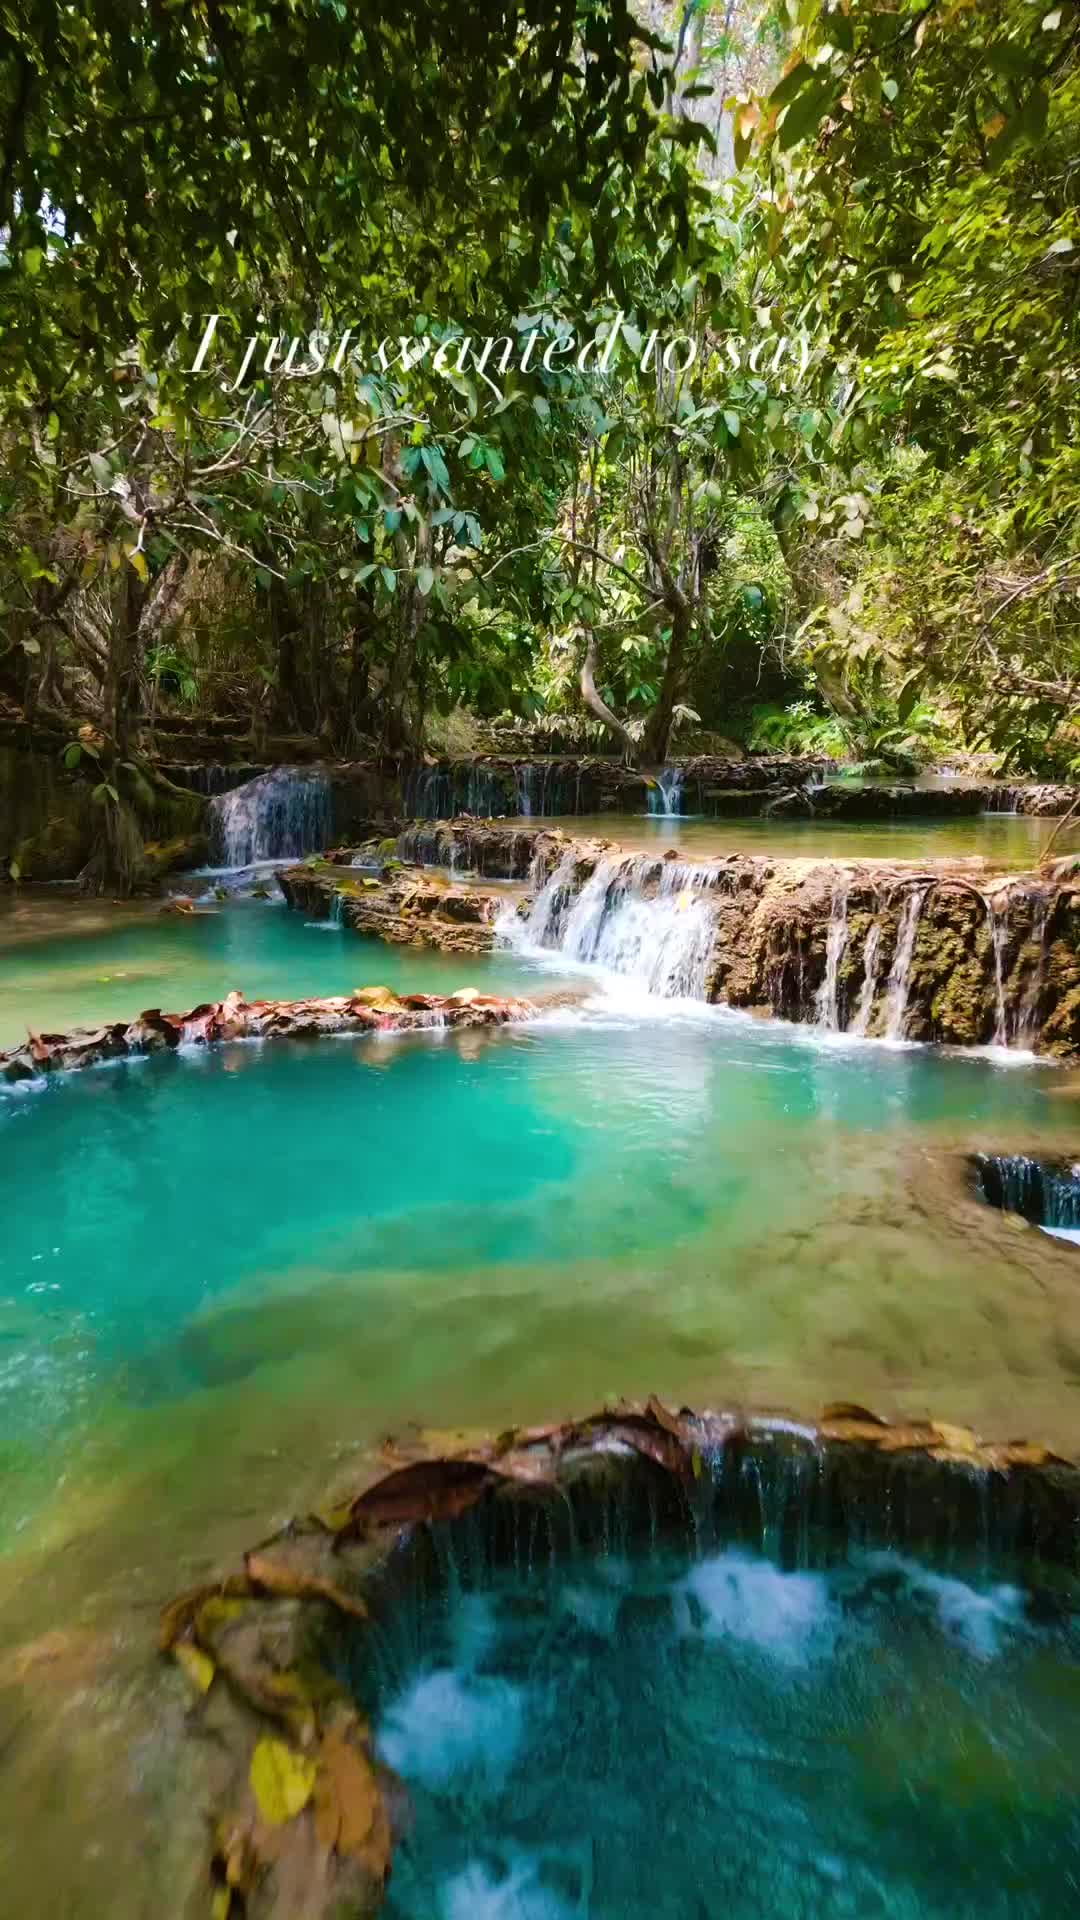 How often do you stop to think about all the things in your life you are grateful for?

📍Kuang Si waterfall, Laos

#quotes #grateful #happiness #enjoylife #travel #waterfall #laos #earth